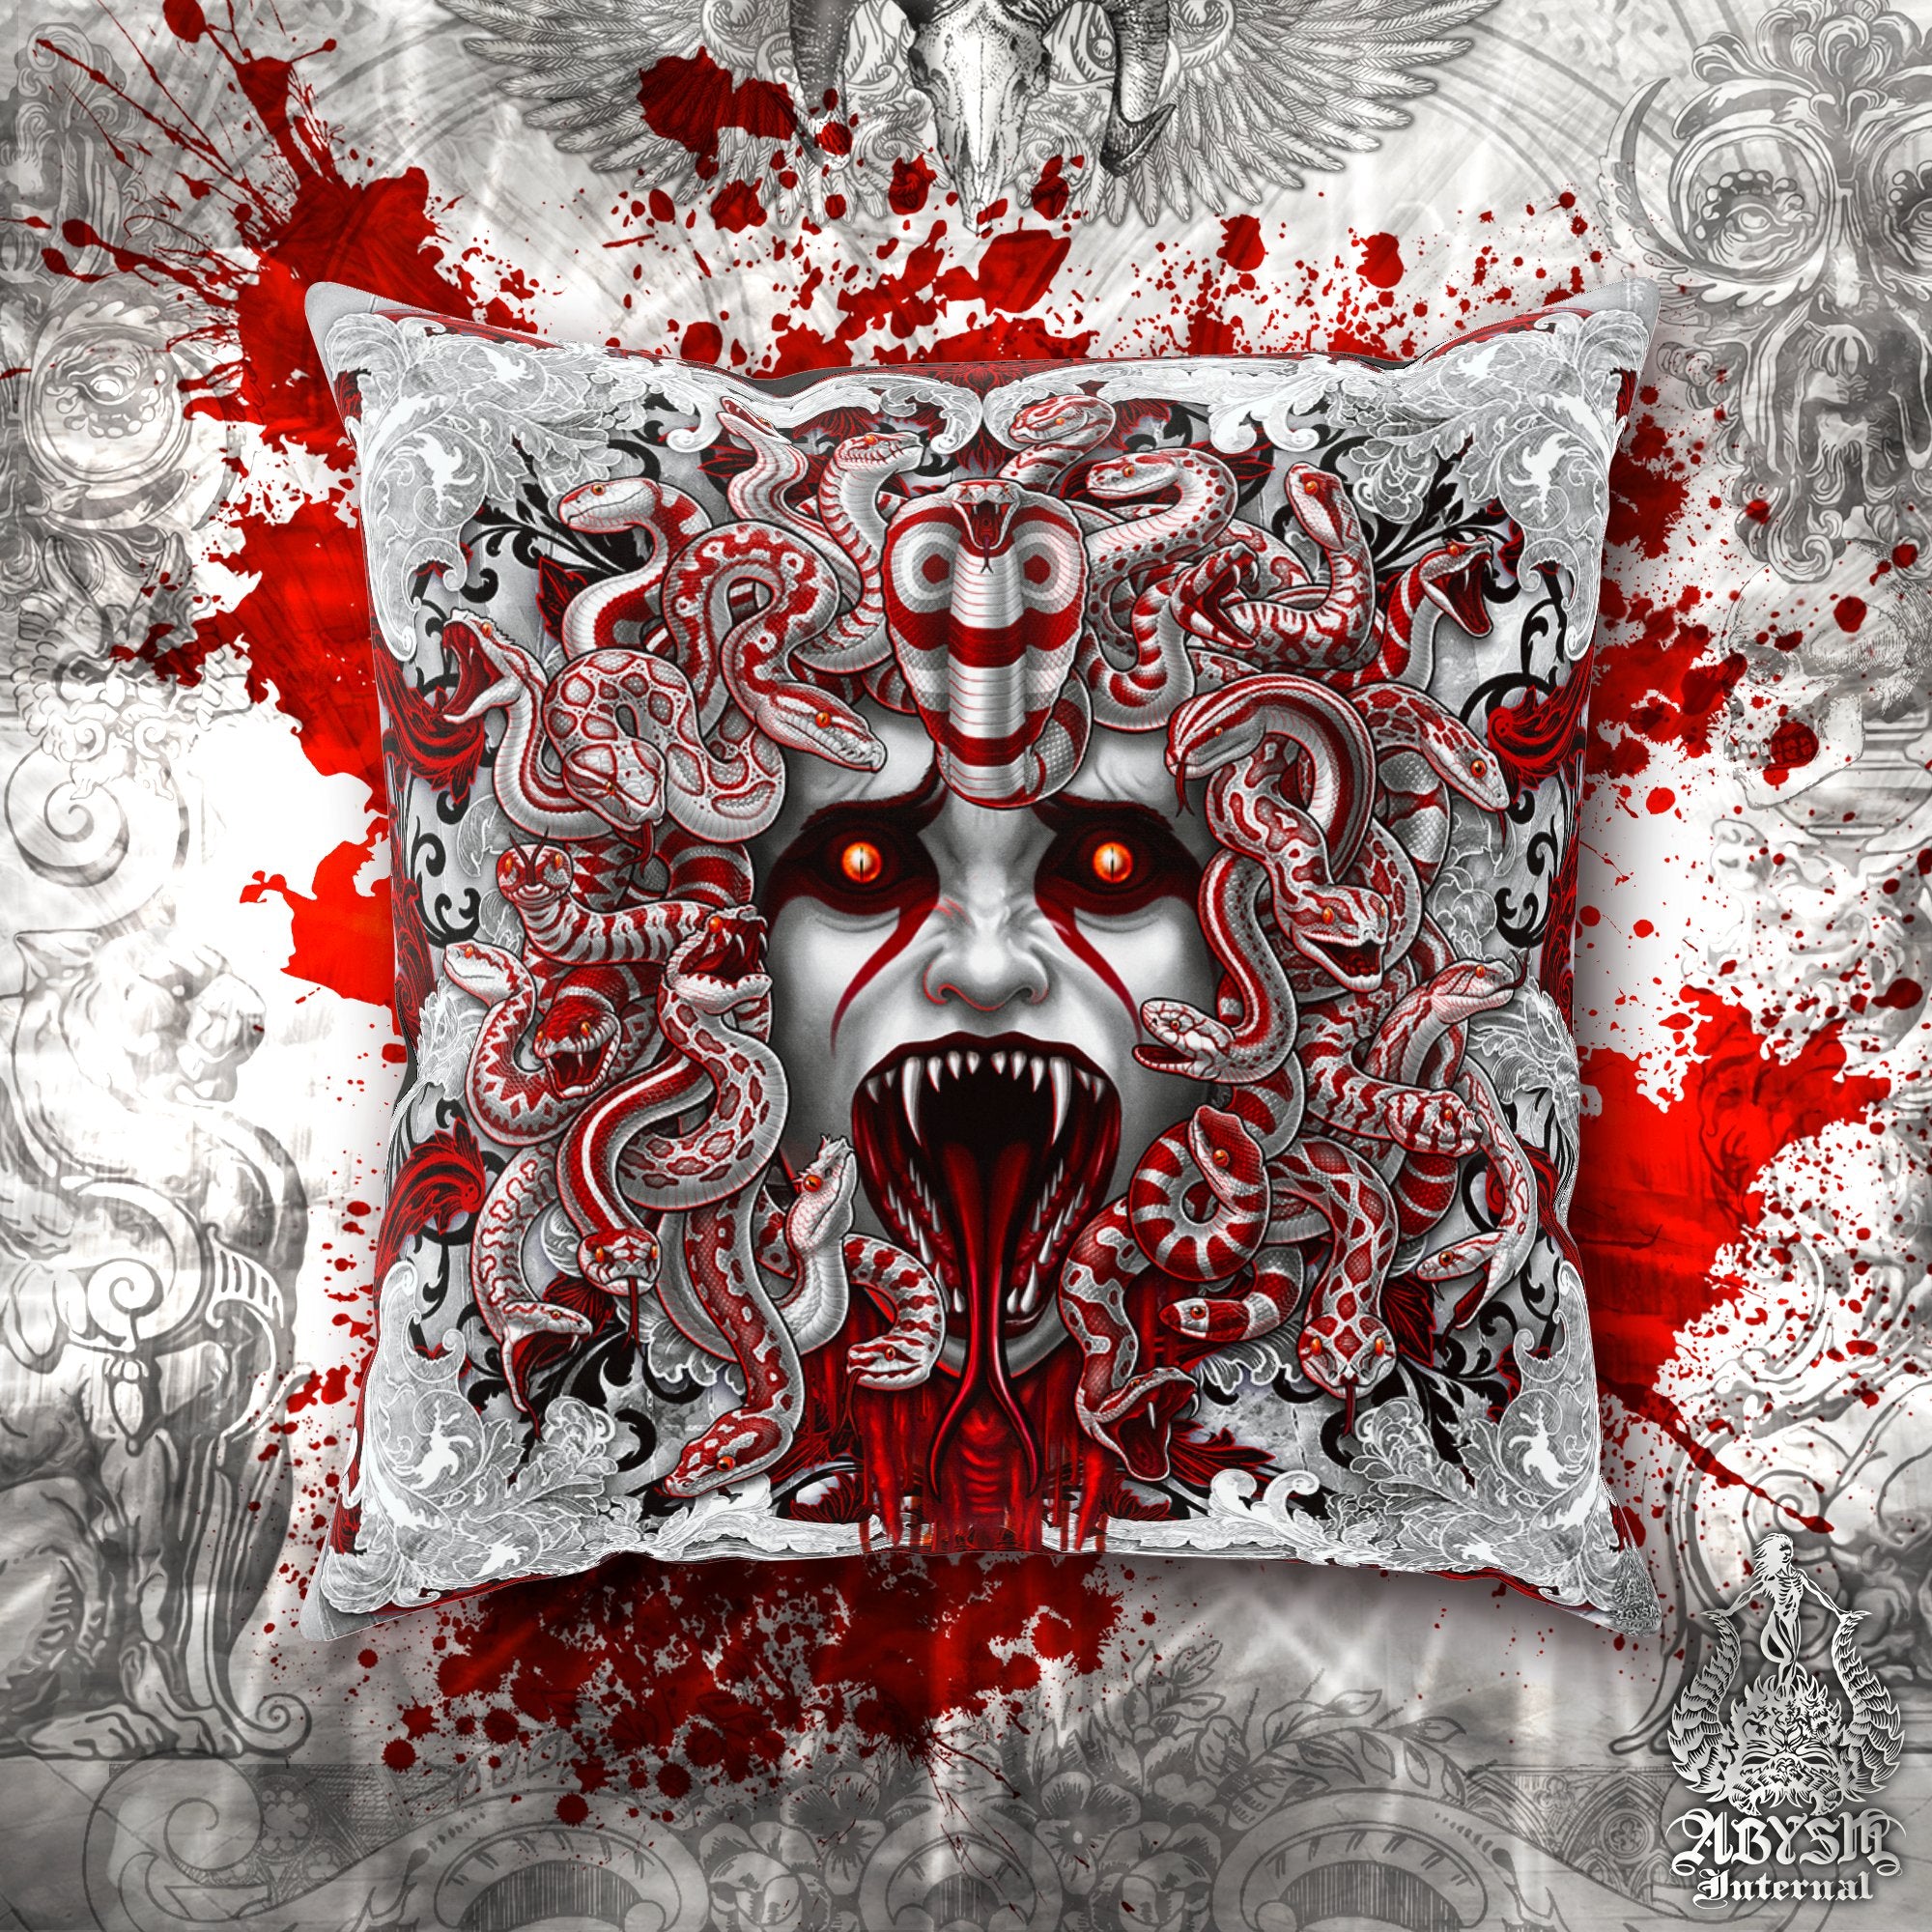 Bloody Skull Throw Pillow, Decorative Accent Pillow, Square Cushion Cover, White Goth Room Decor, Gothic Art, Horror Home - White Medusa, 4 Faces - Abysm Internal